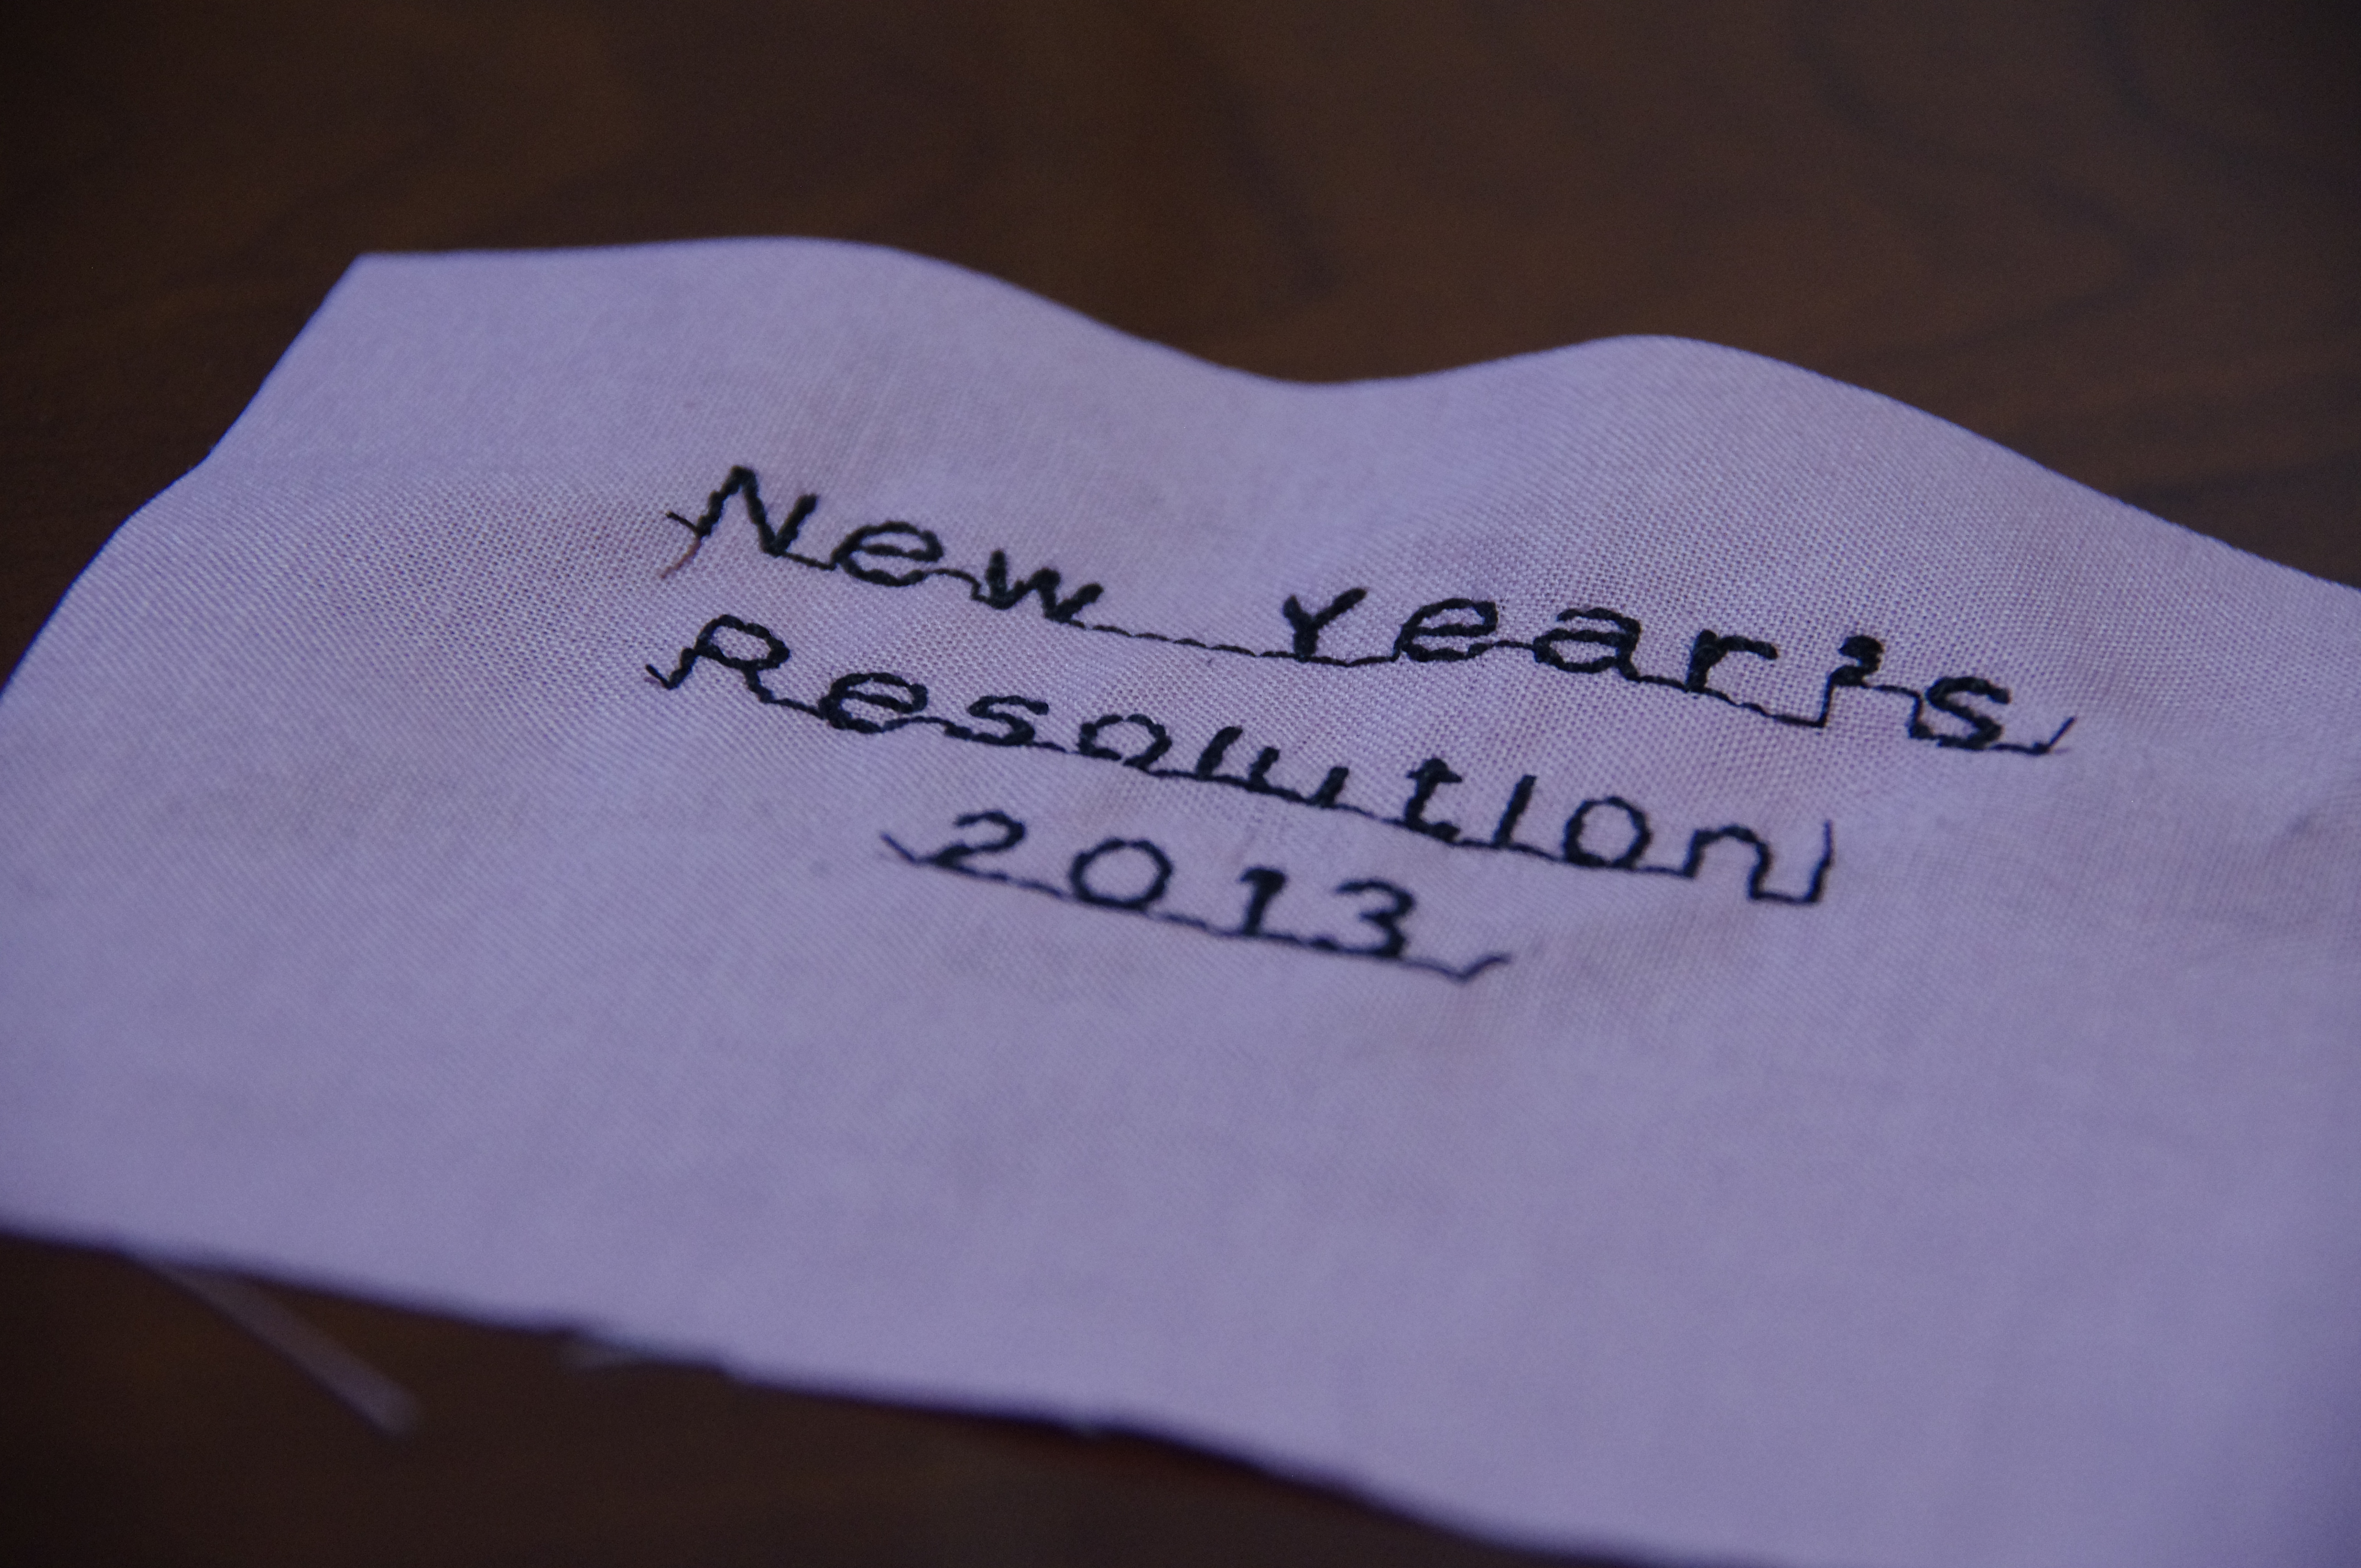 New Year’s Resolution 2013